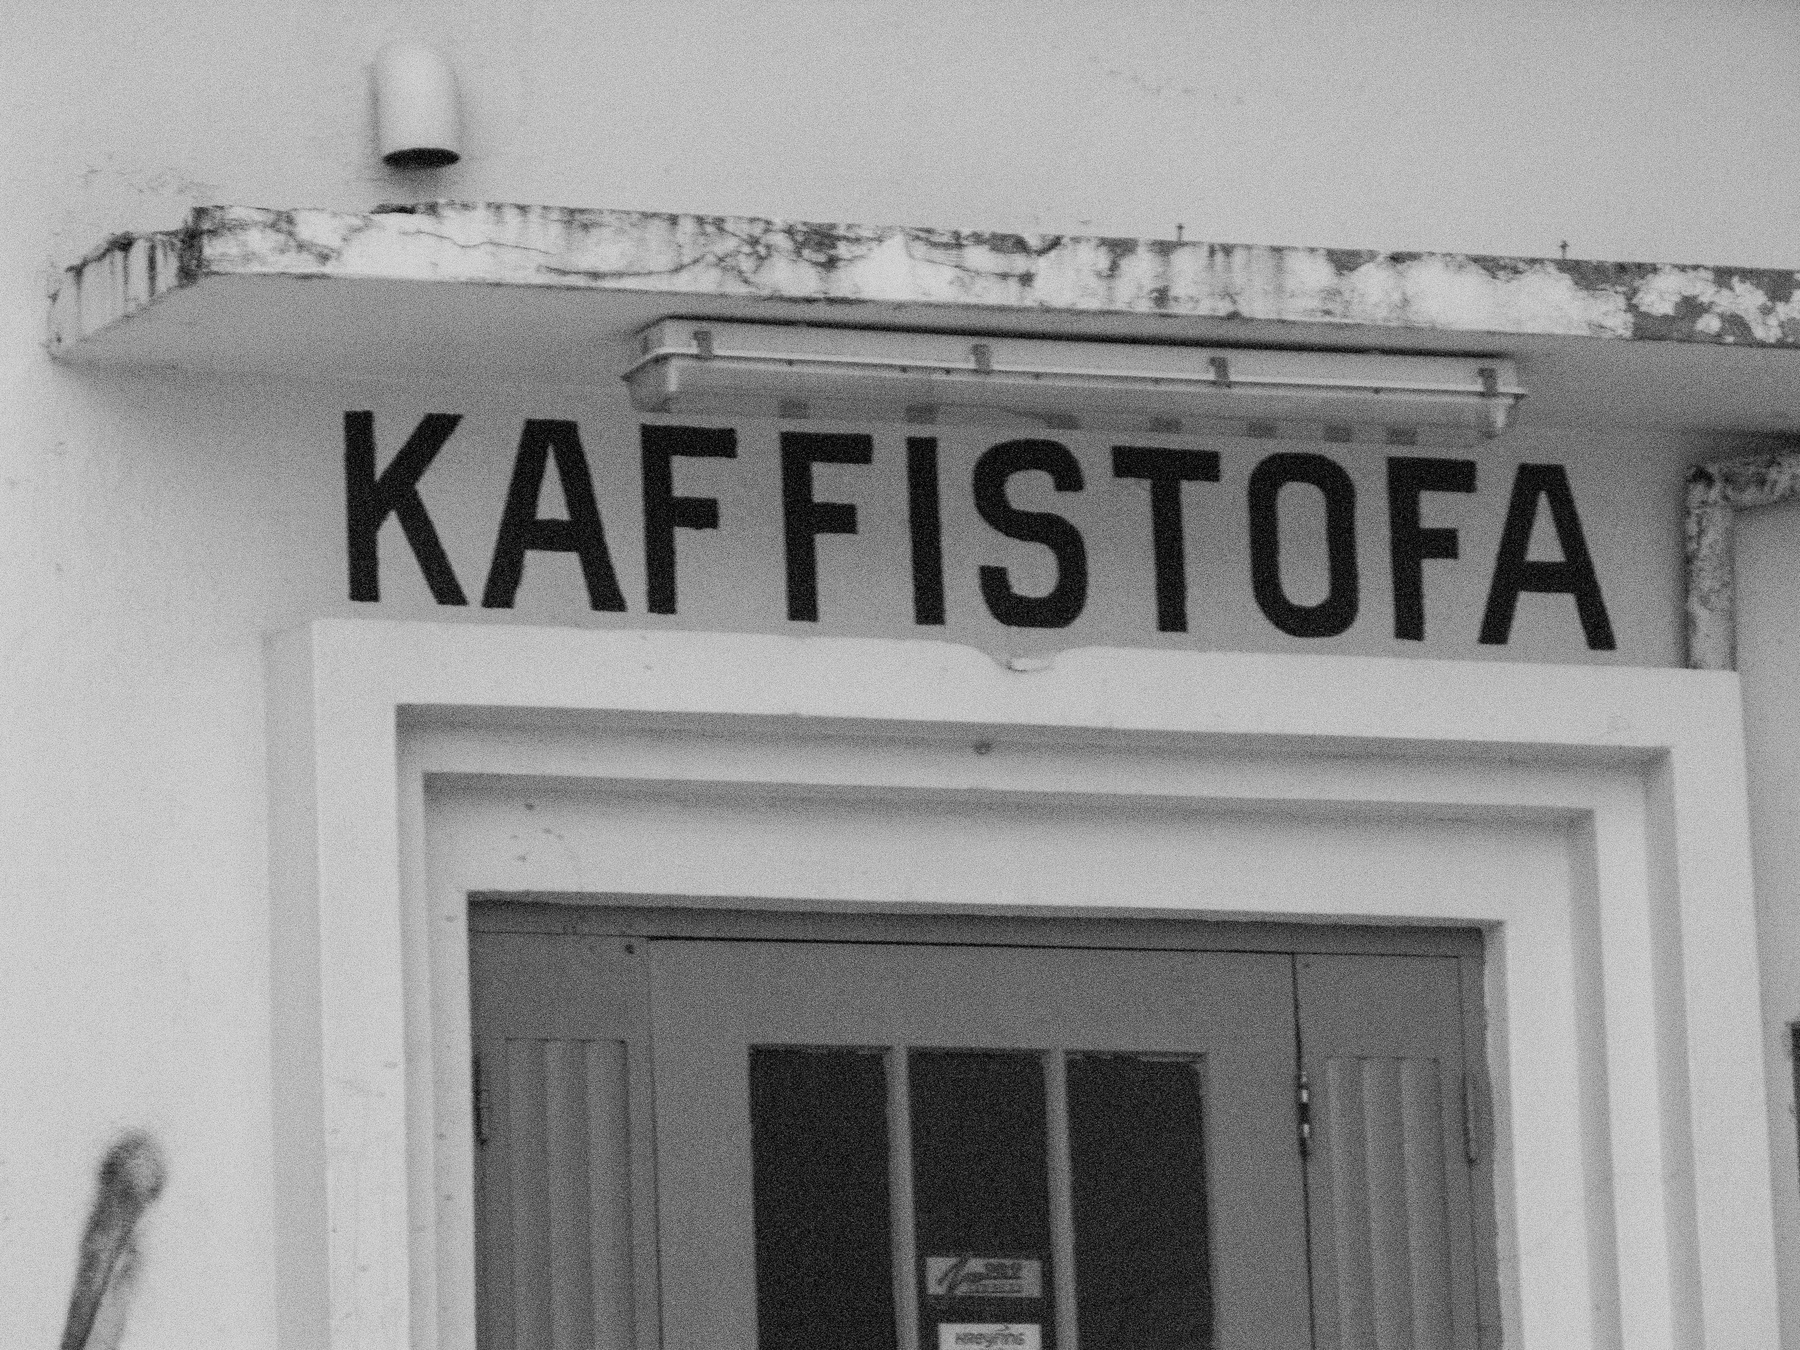 An entrance to a “kaffistofa” as the sign above the door says. This is the opposite of a café. A place where coffee is a utilitarian beverage.